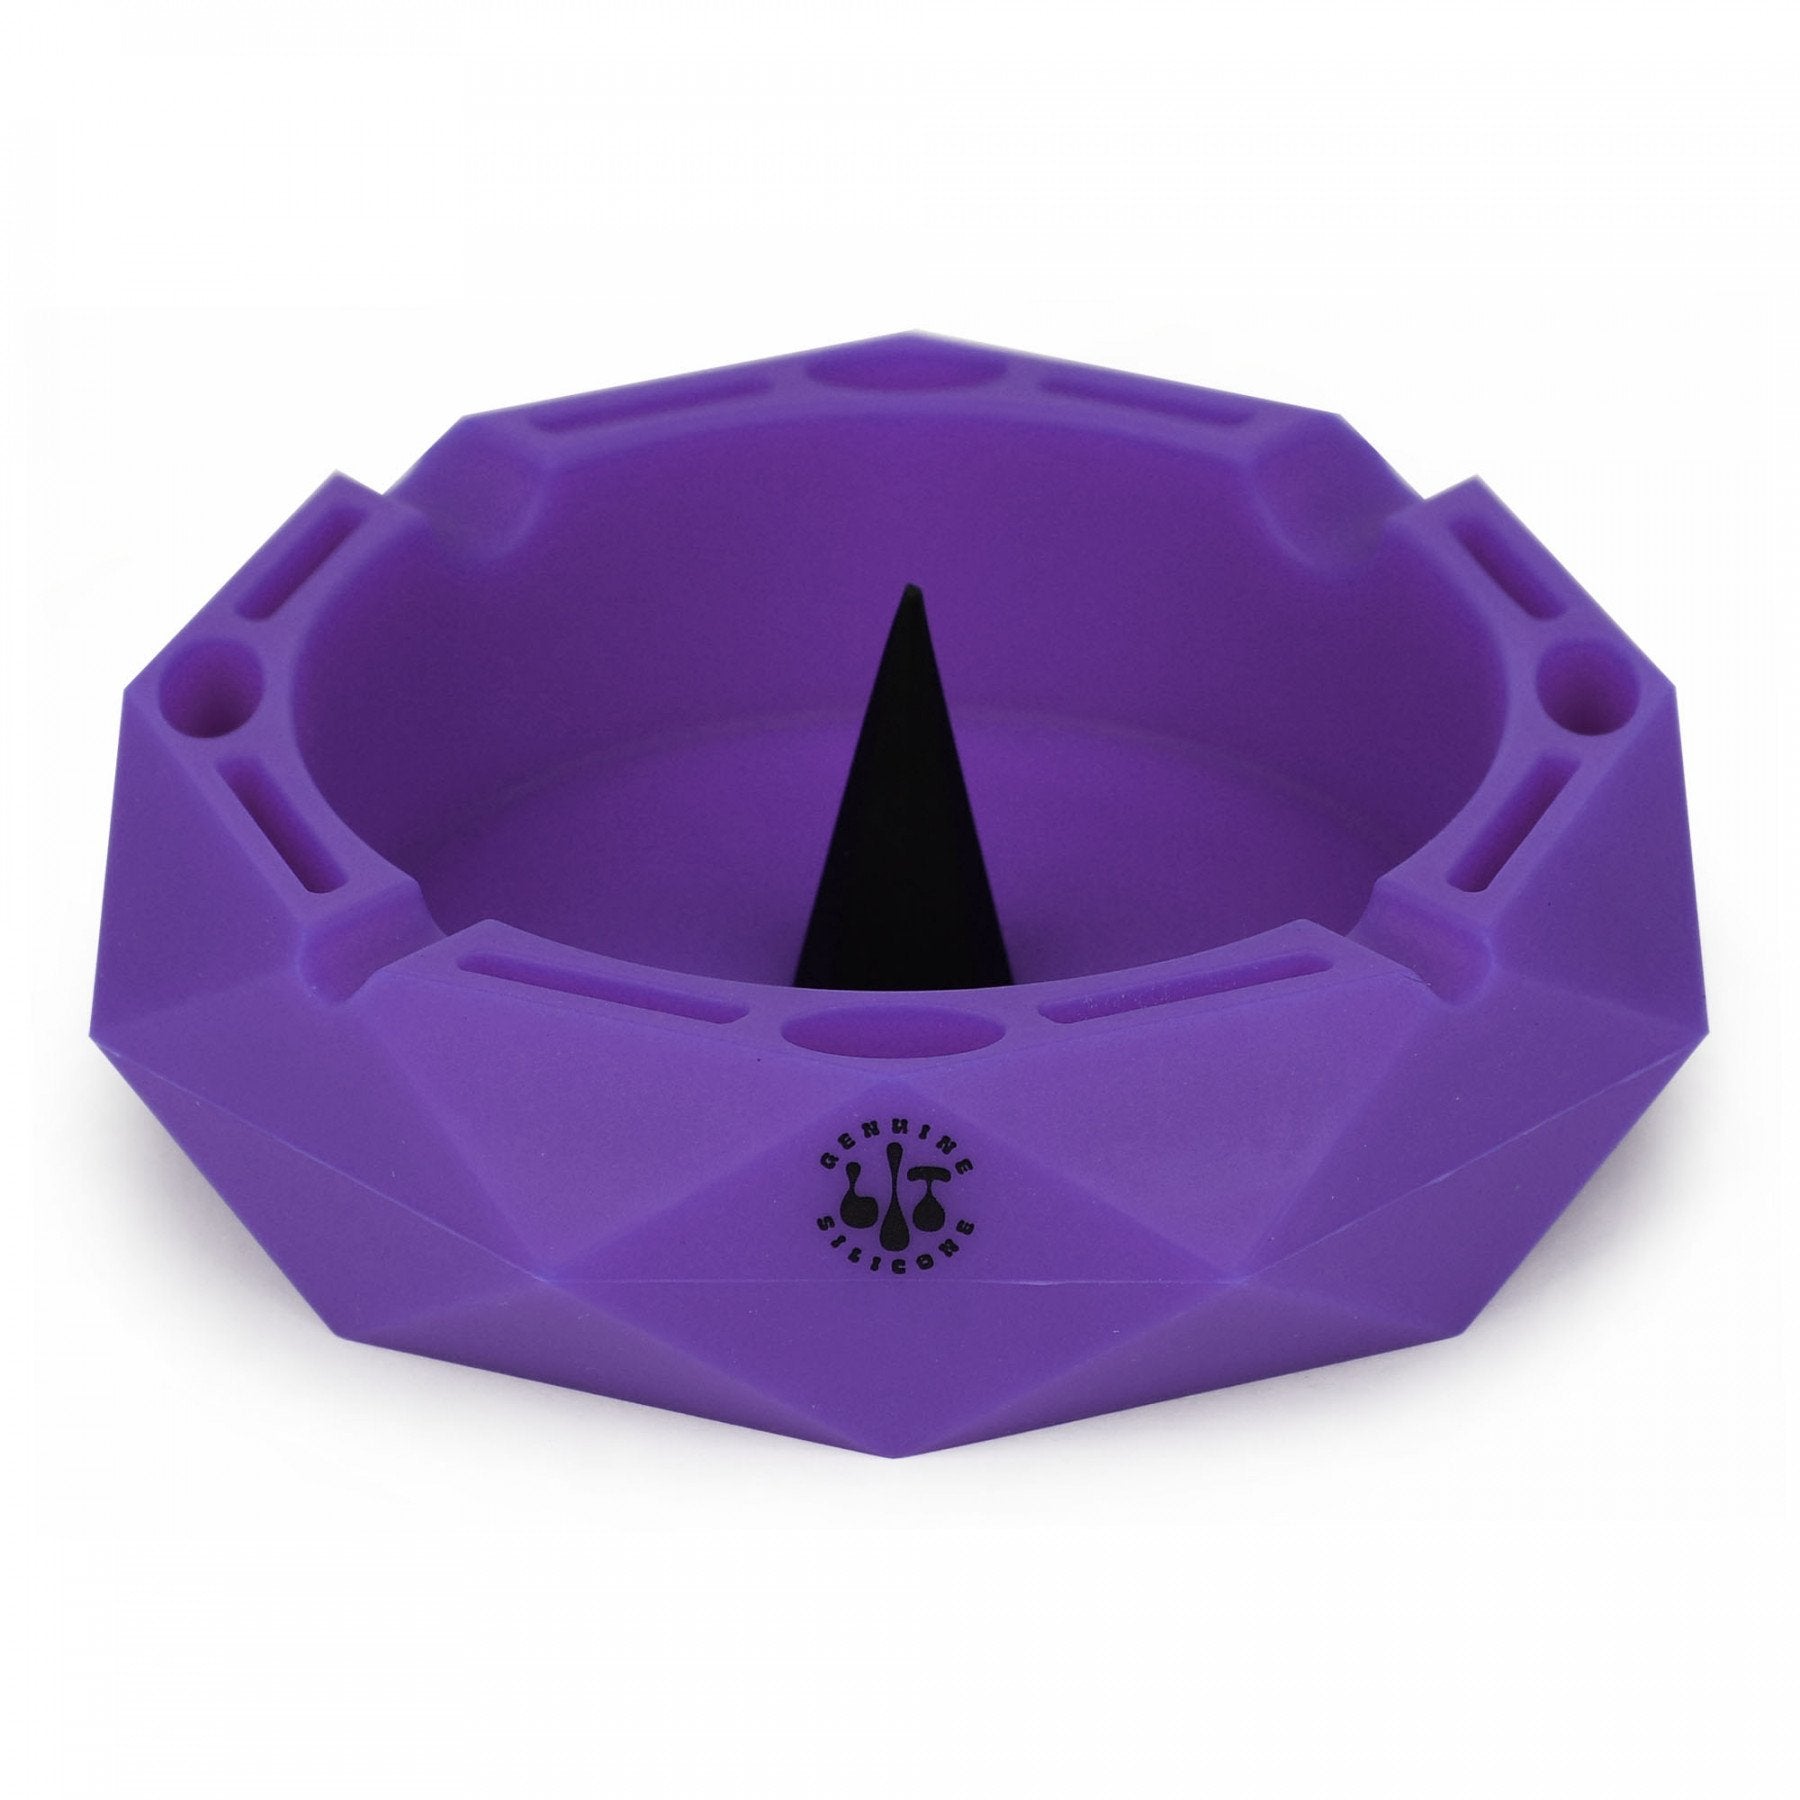 Silicone 5" Round Ashtray / Bowl Cleaner